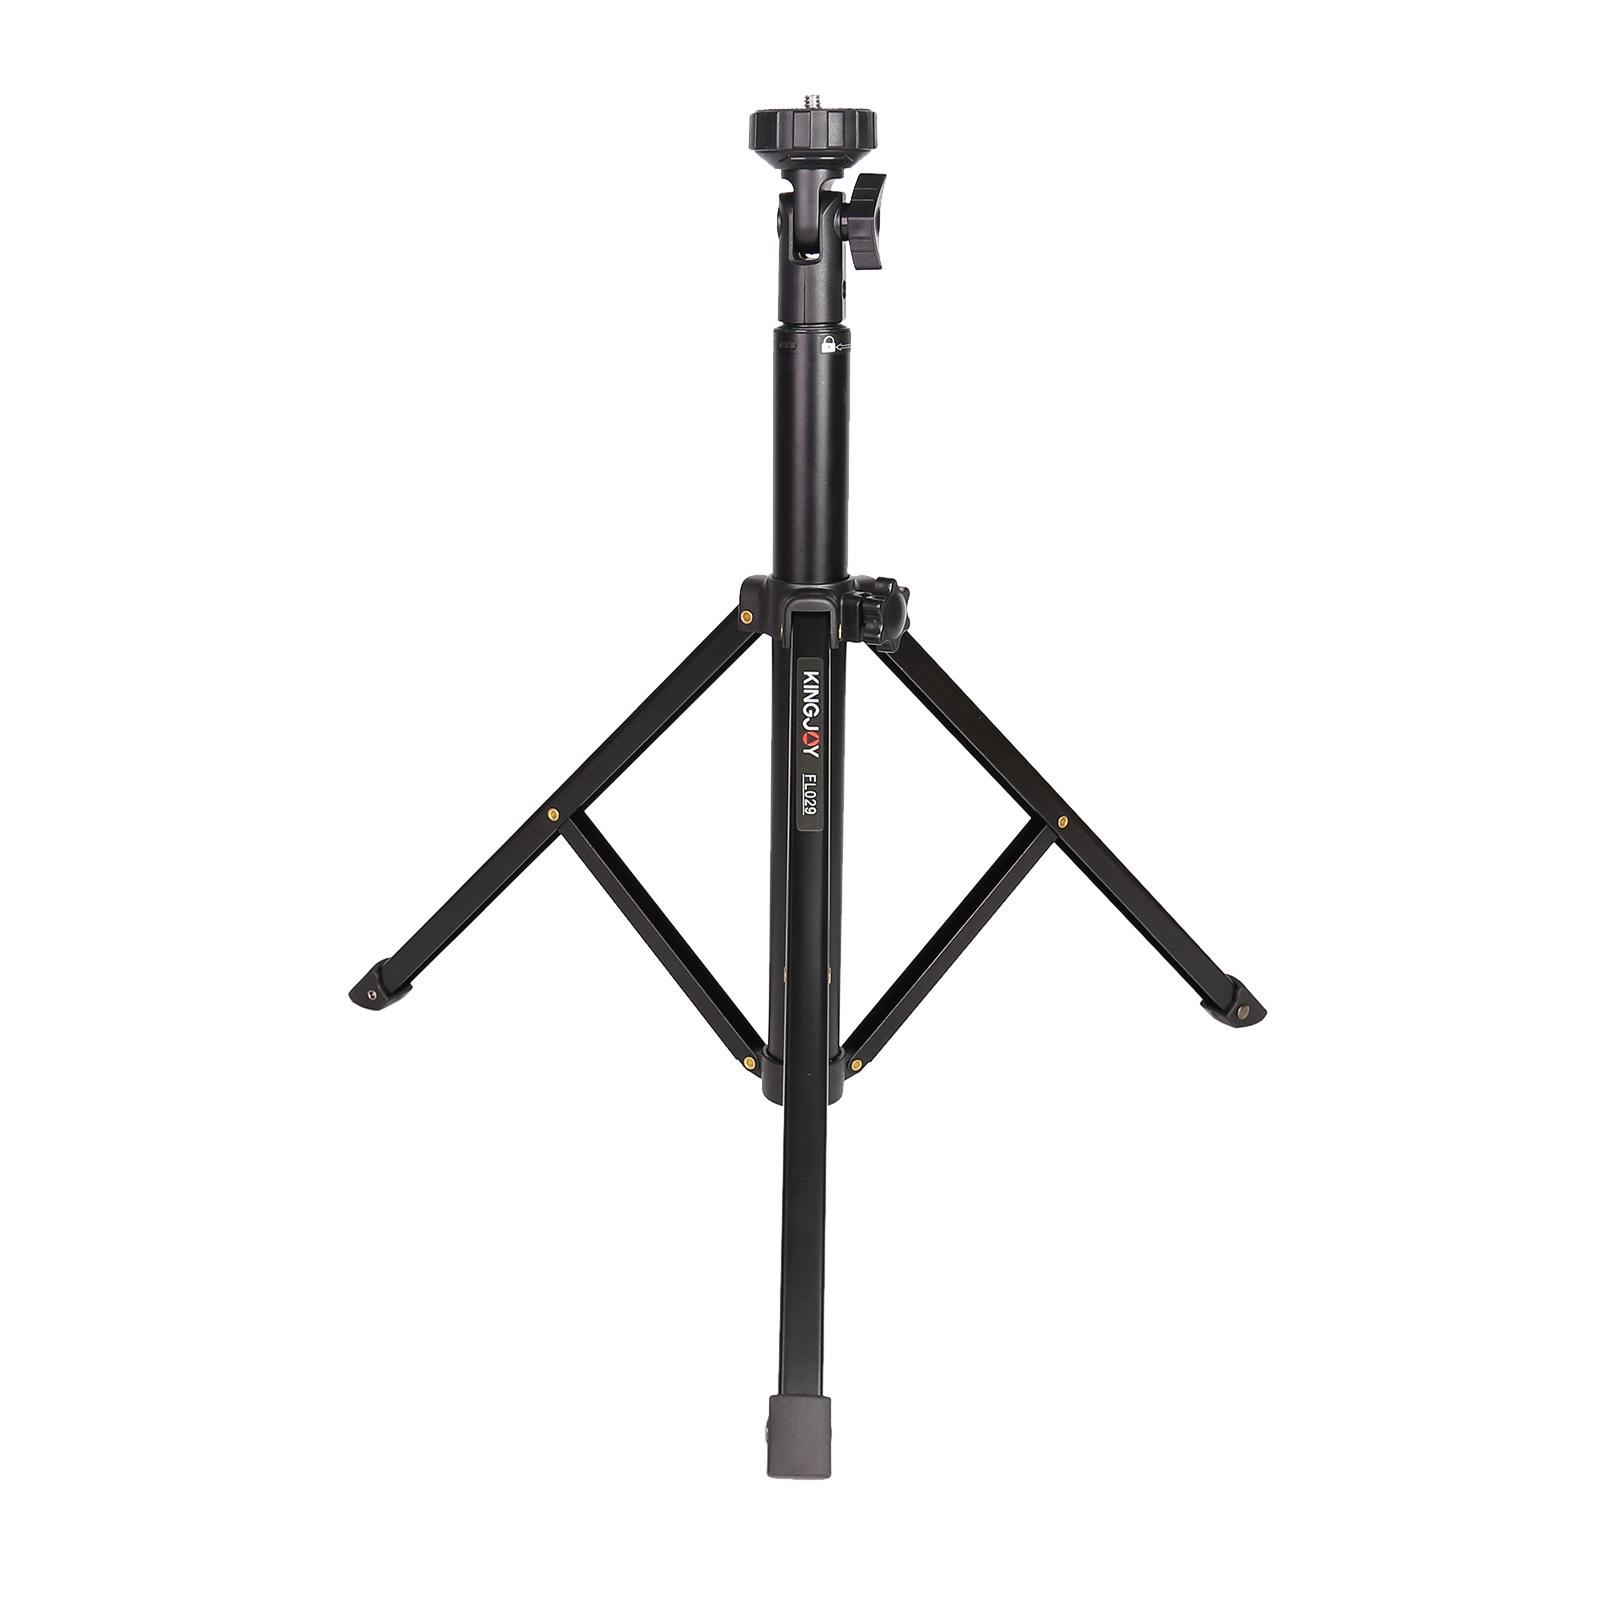 Mua KINGJOY Adjustable Aluminum Tripod Stand 3KG Payload 5-section 144cm/56.7-inch with Universal 1/4 Interface for DSLR SLR